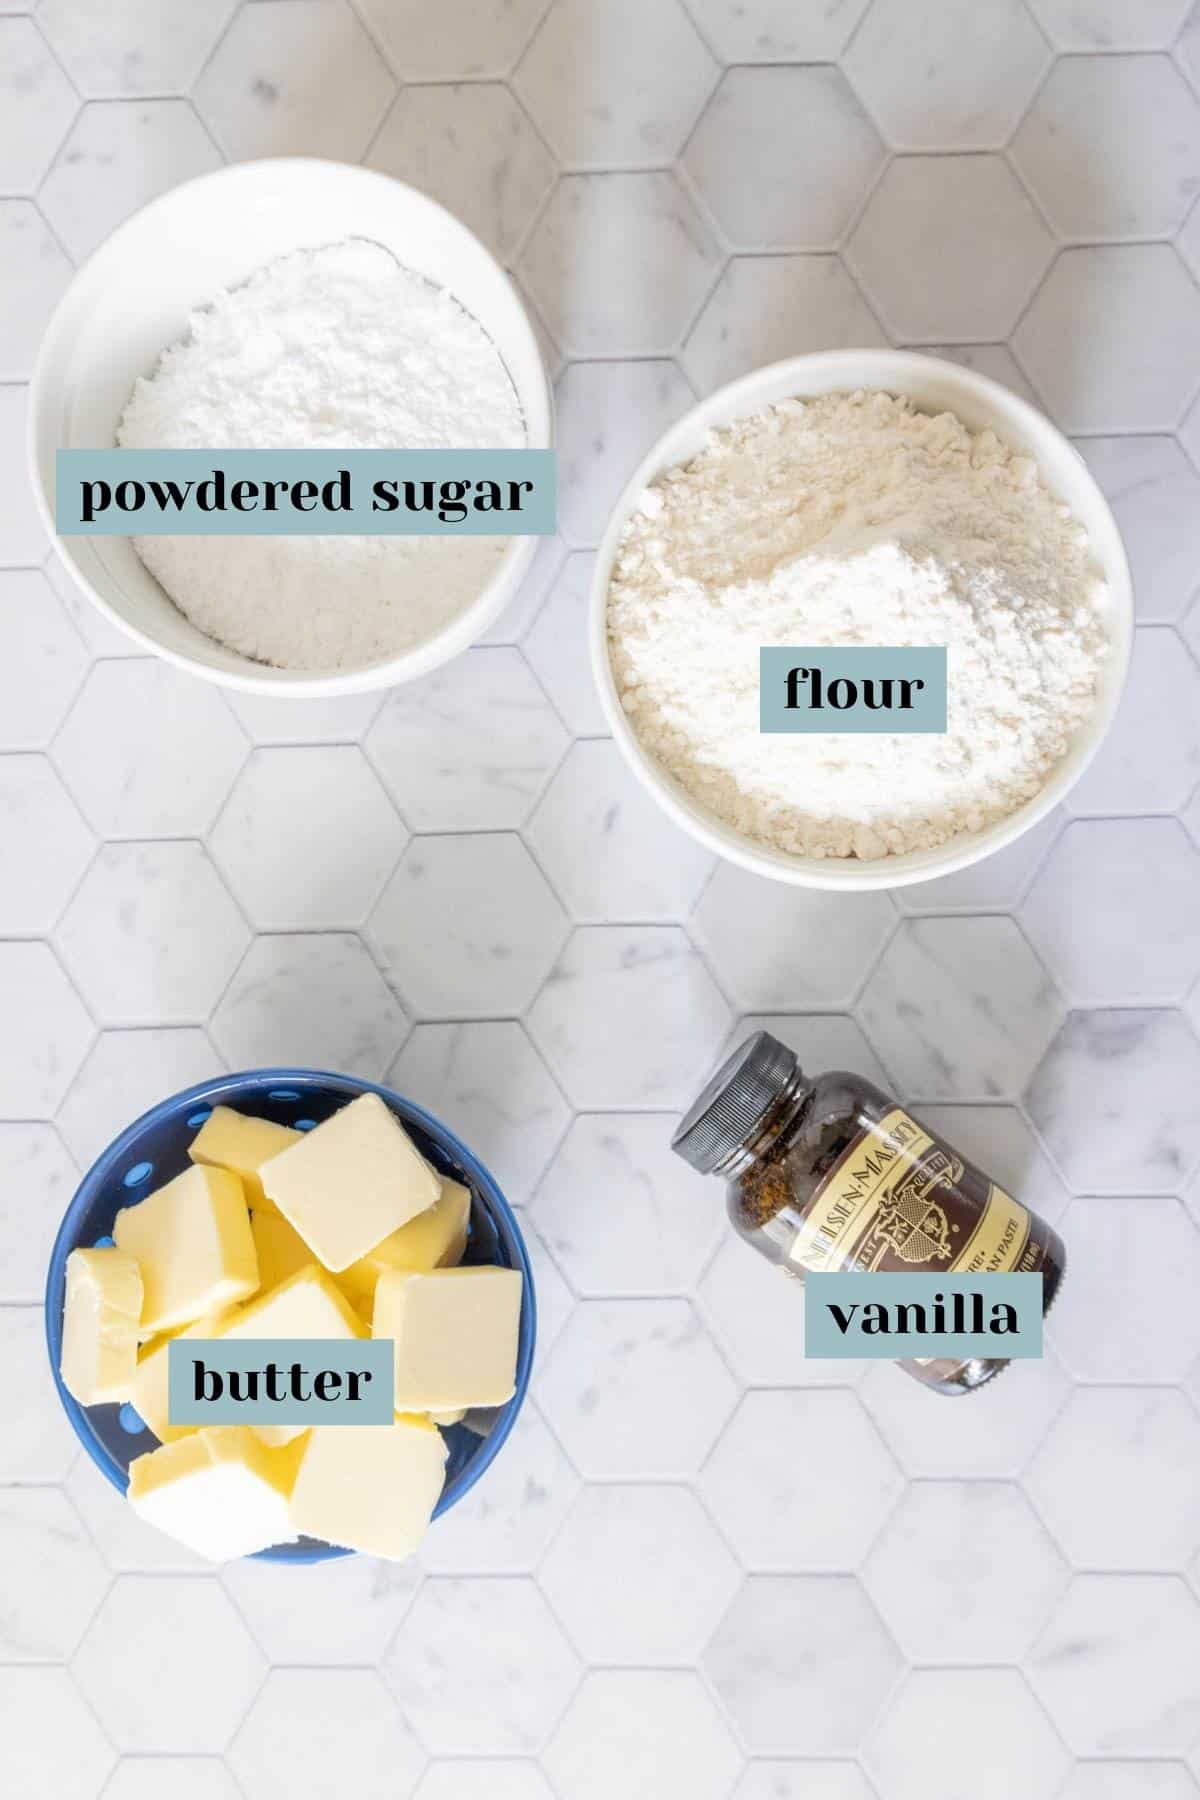 Ingredients for shortbread cookies on a tile surface with labels.